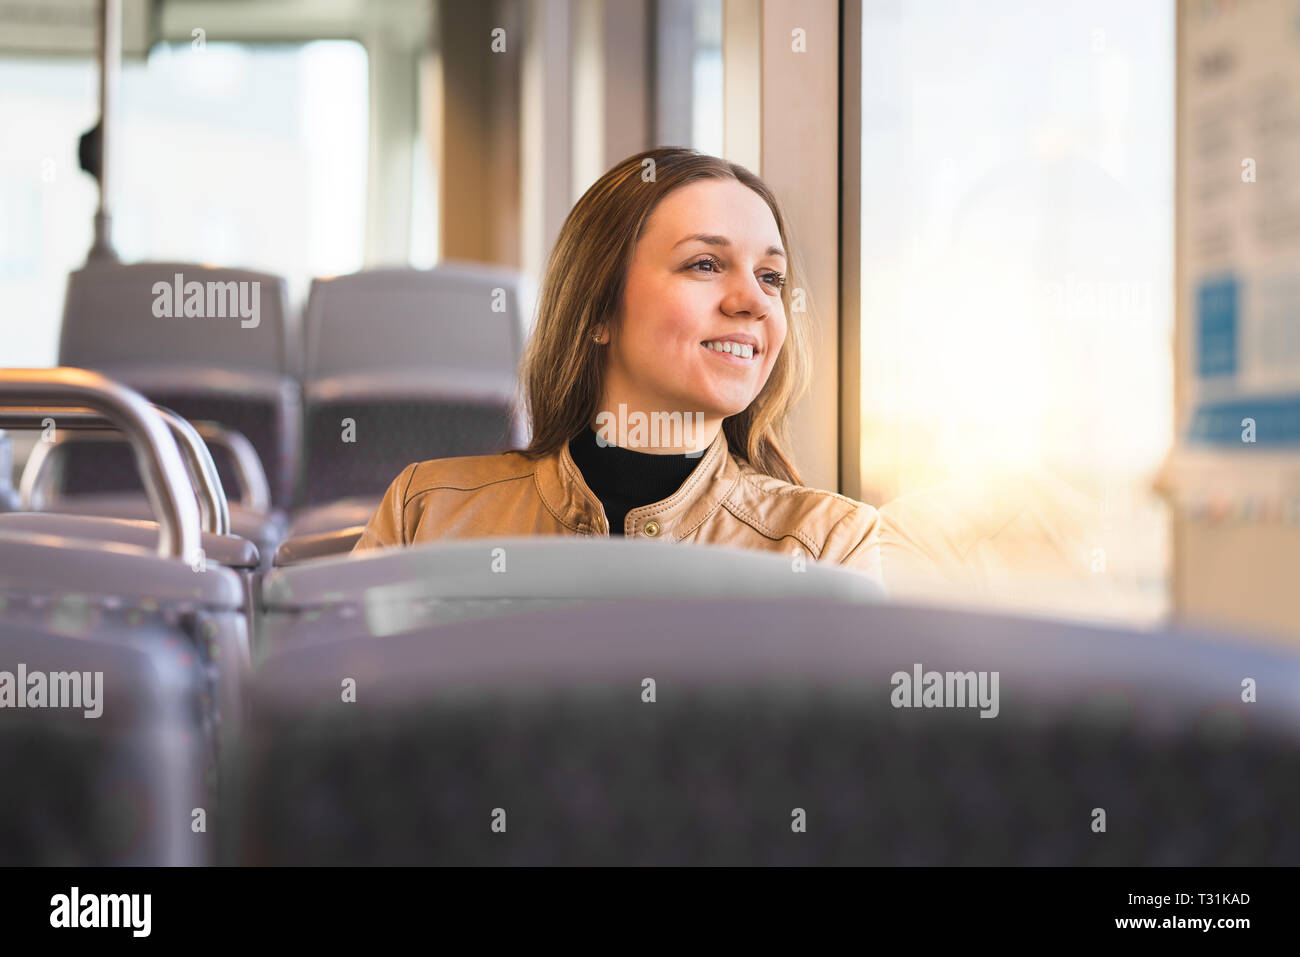 Happy lady looking out the window in bus, train, tram or subway. Smiling woman riding public transportation on her way to work or vacation. Stock Photo